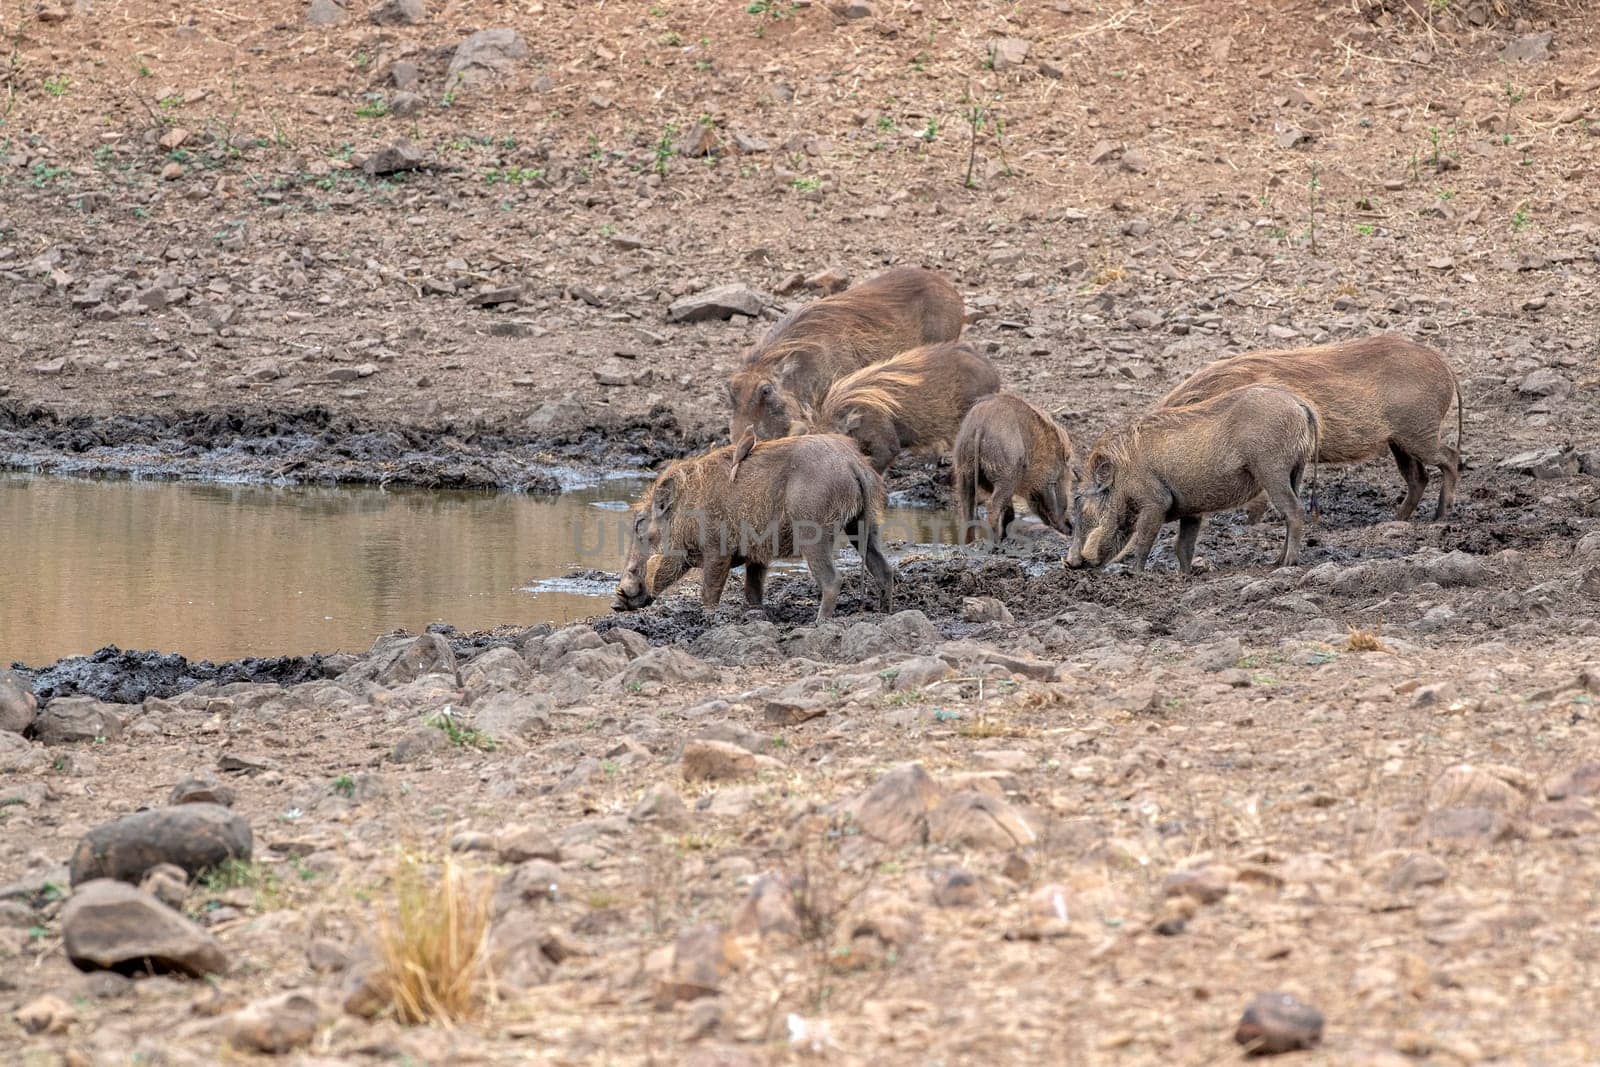 warthog at drinking pool in kruger park south africa by AndreaIzzotti